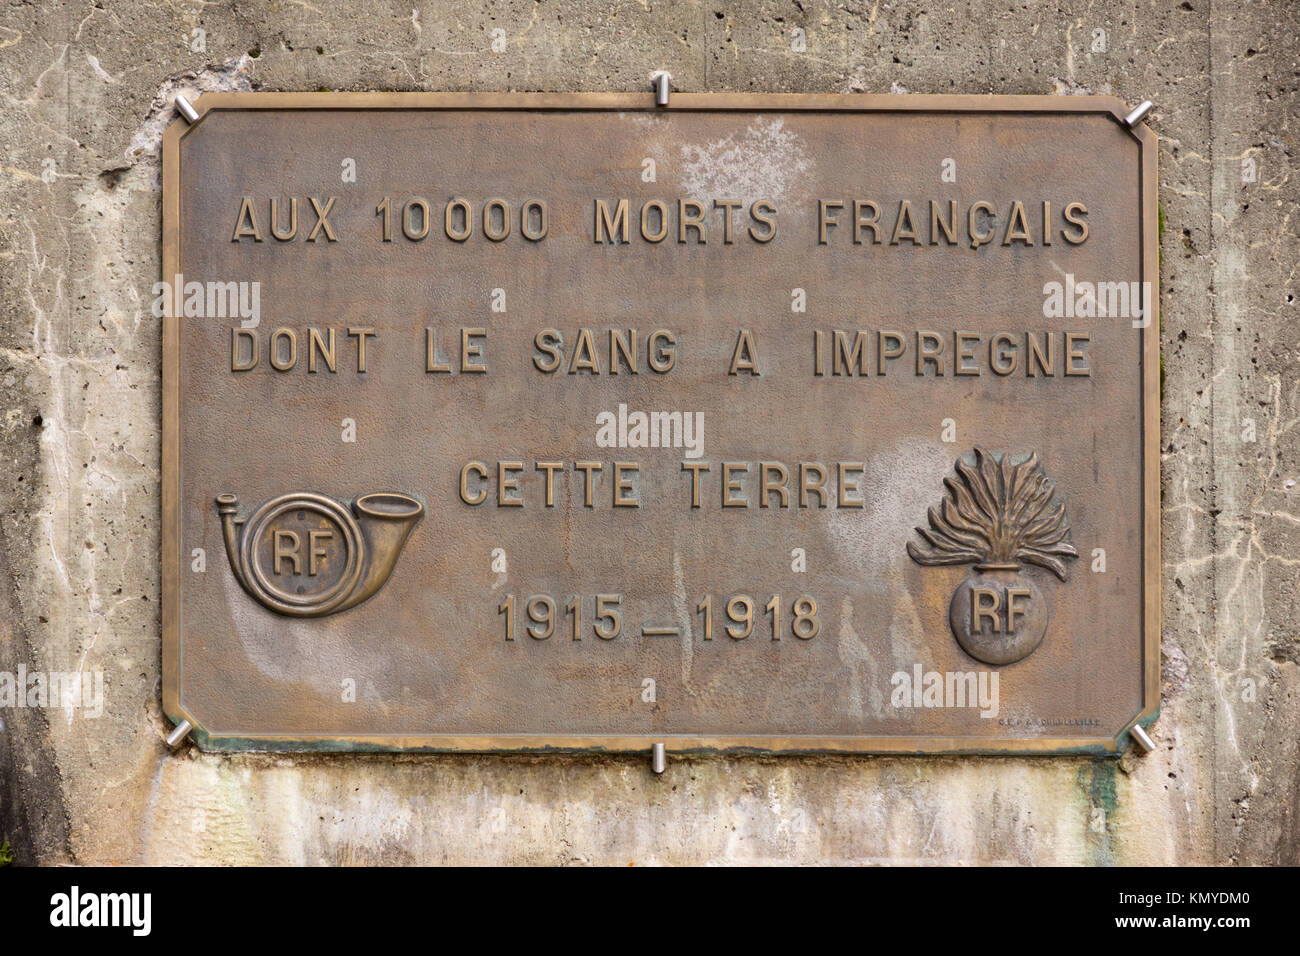 A plaque dedicated to 'The 10,000 dead French soldiers whose blood impregnated this earth 1915-1918', at the memorial museum of the Linge, Alsace Stock Photo